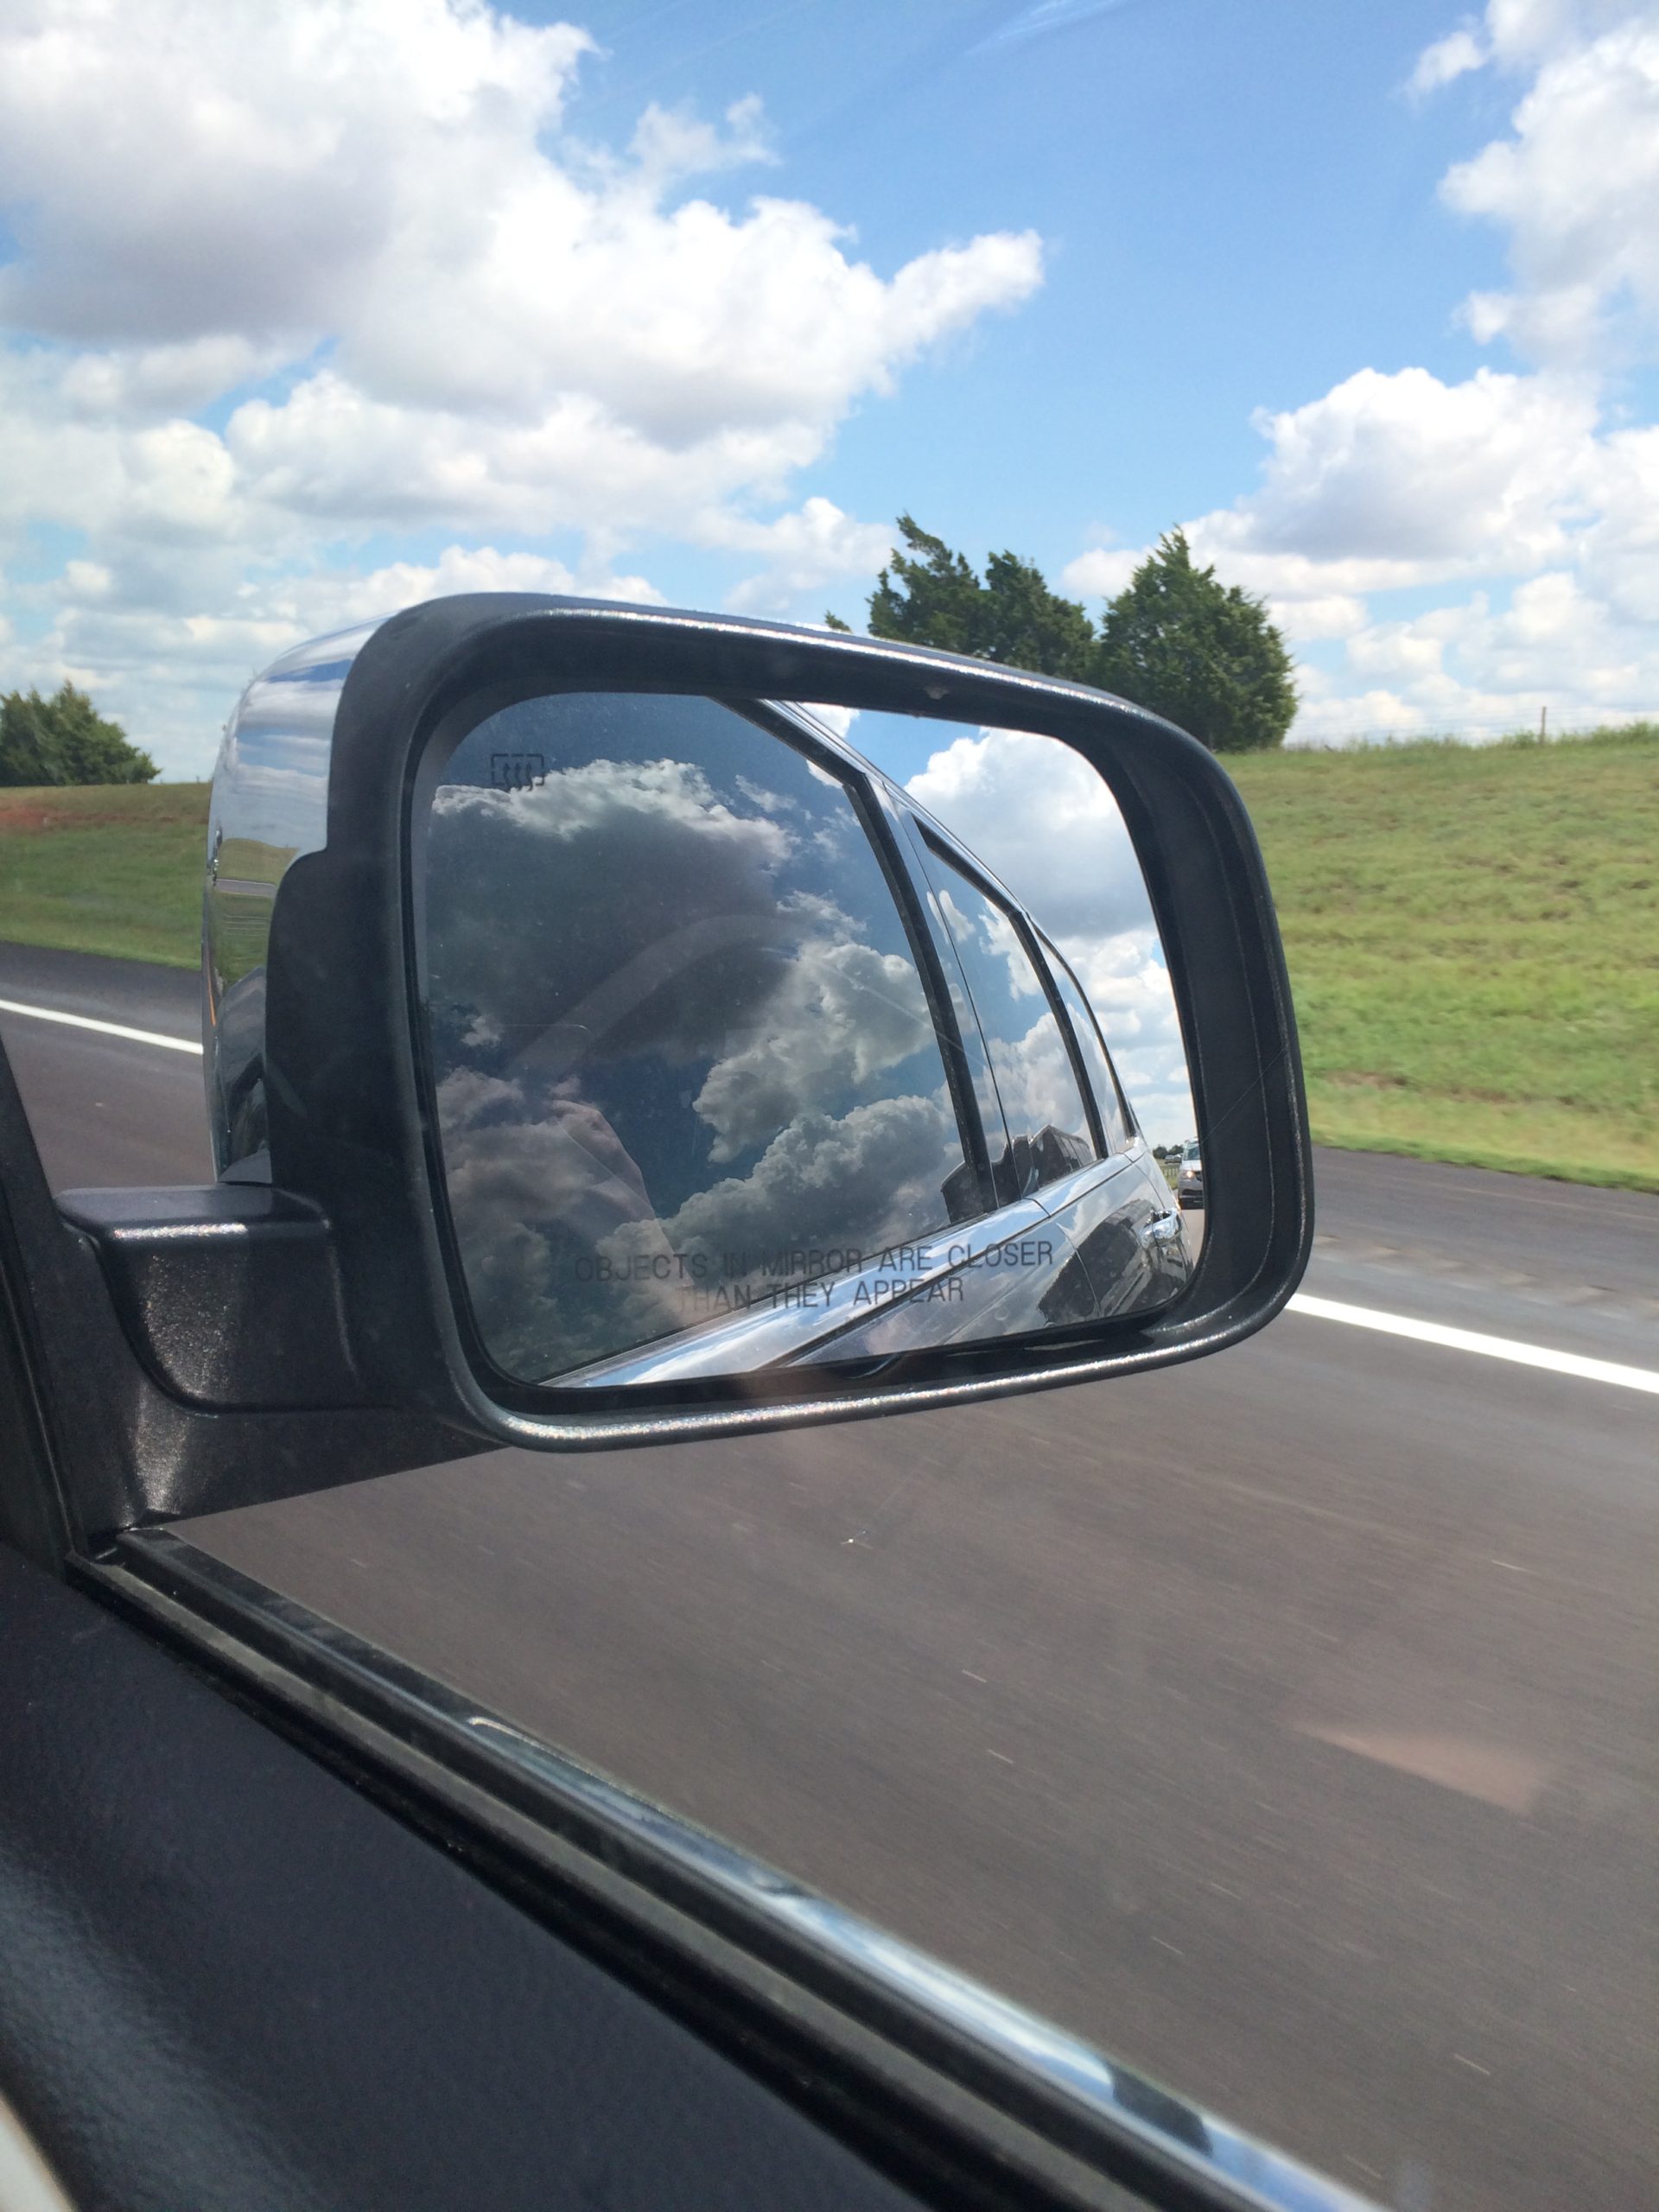 How Having a Kid Changed How I View Road Trips